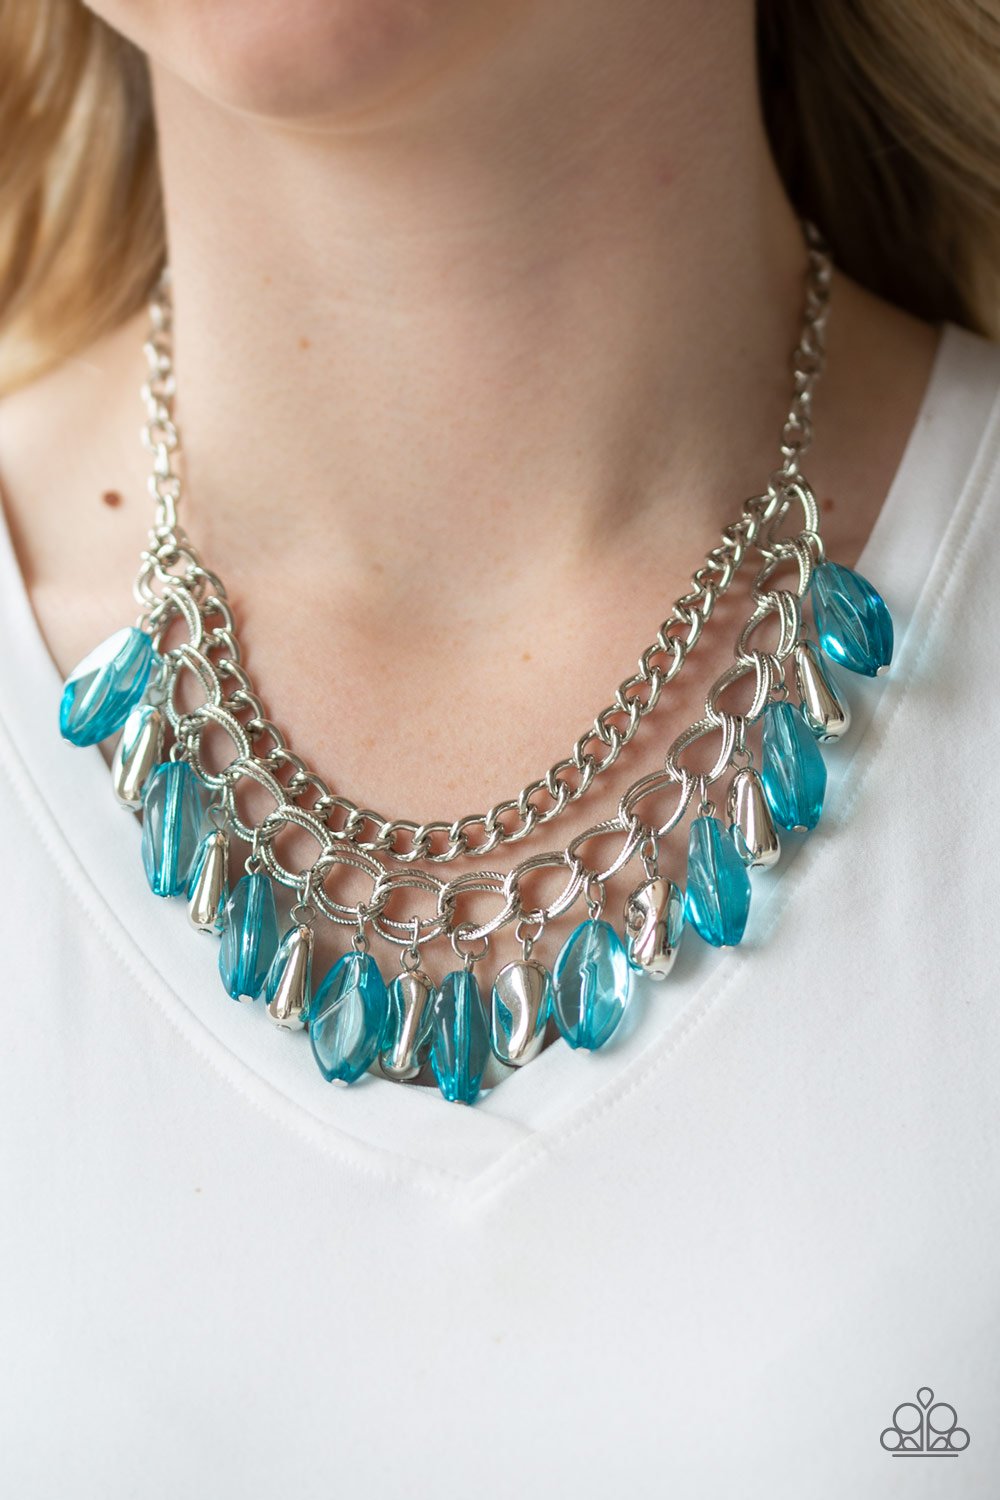 Paparazzi Accessories - Spring Daydream - Blue Necklace